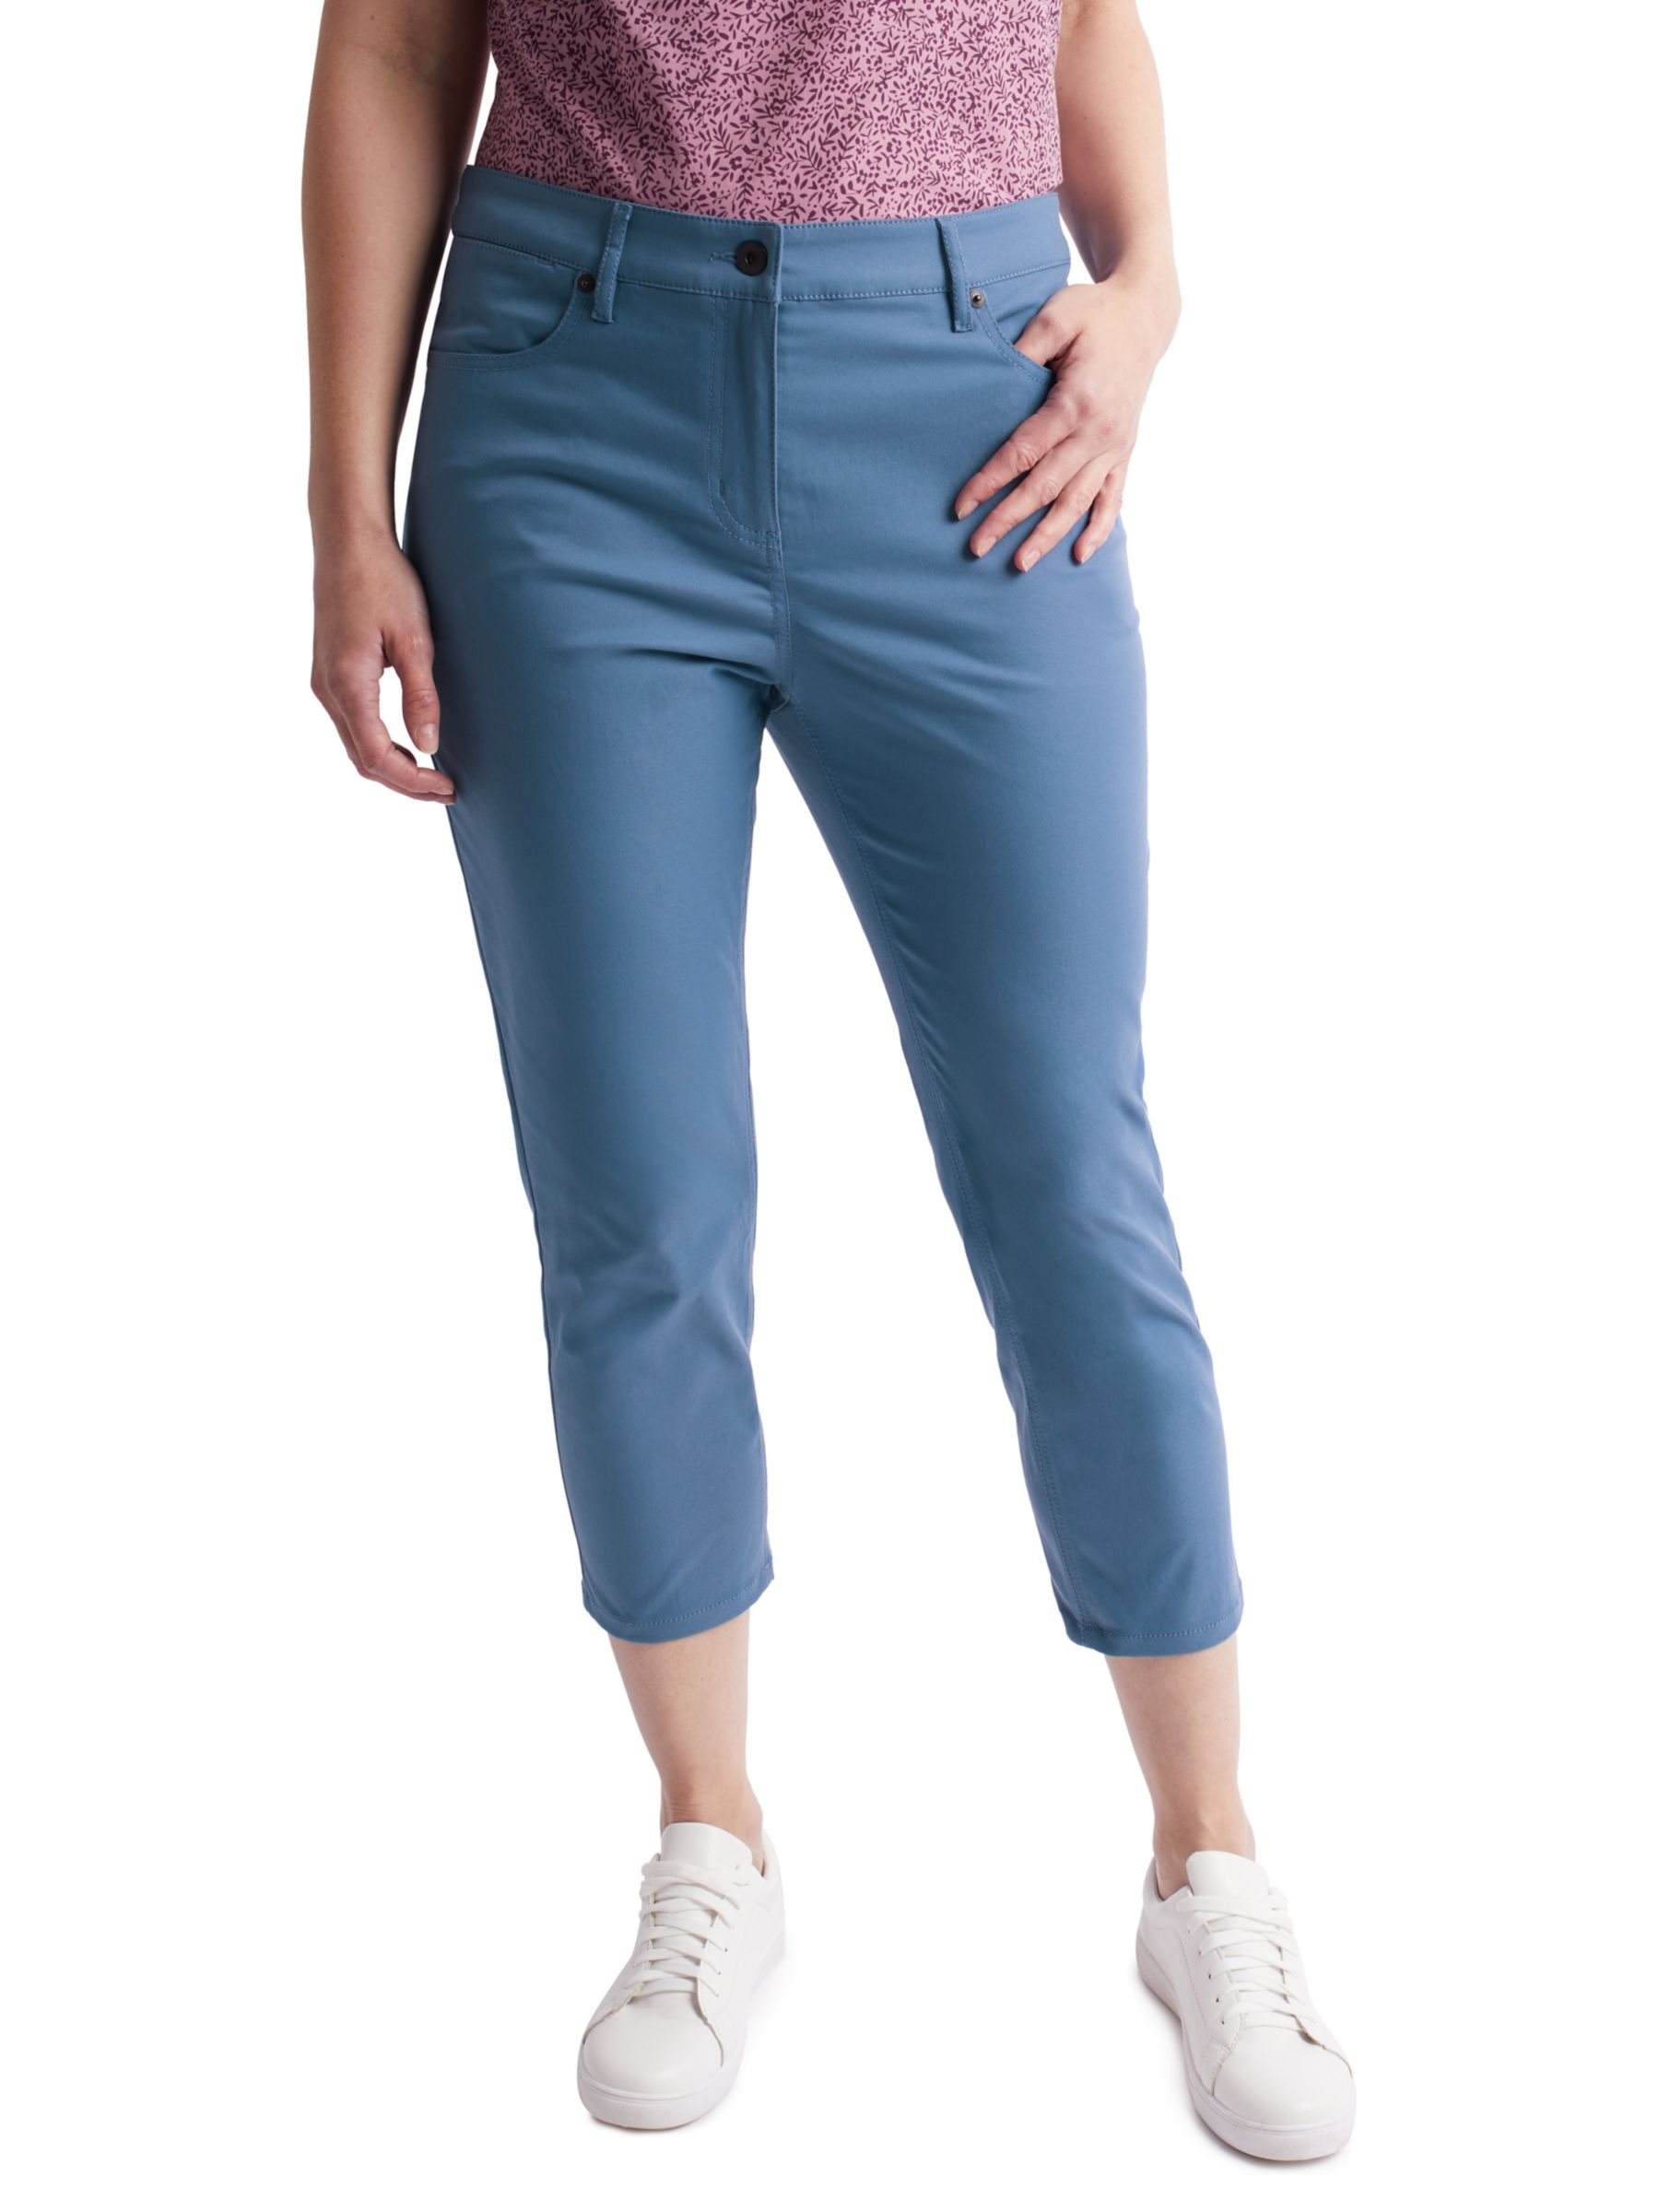 Rohan District Cropped Everyday Trousers, Heather Blue, 8R